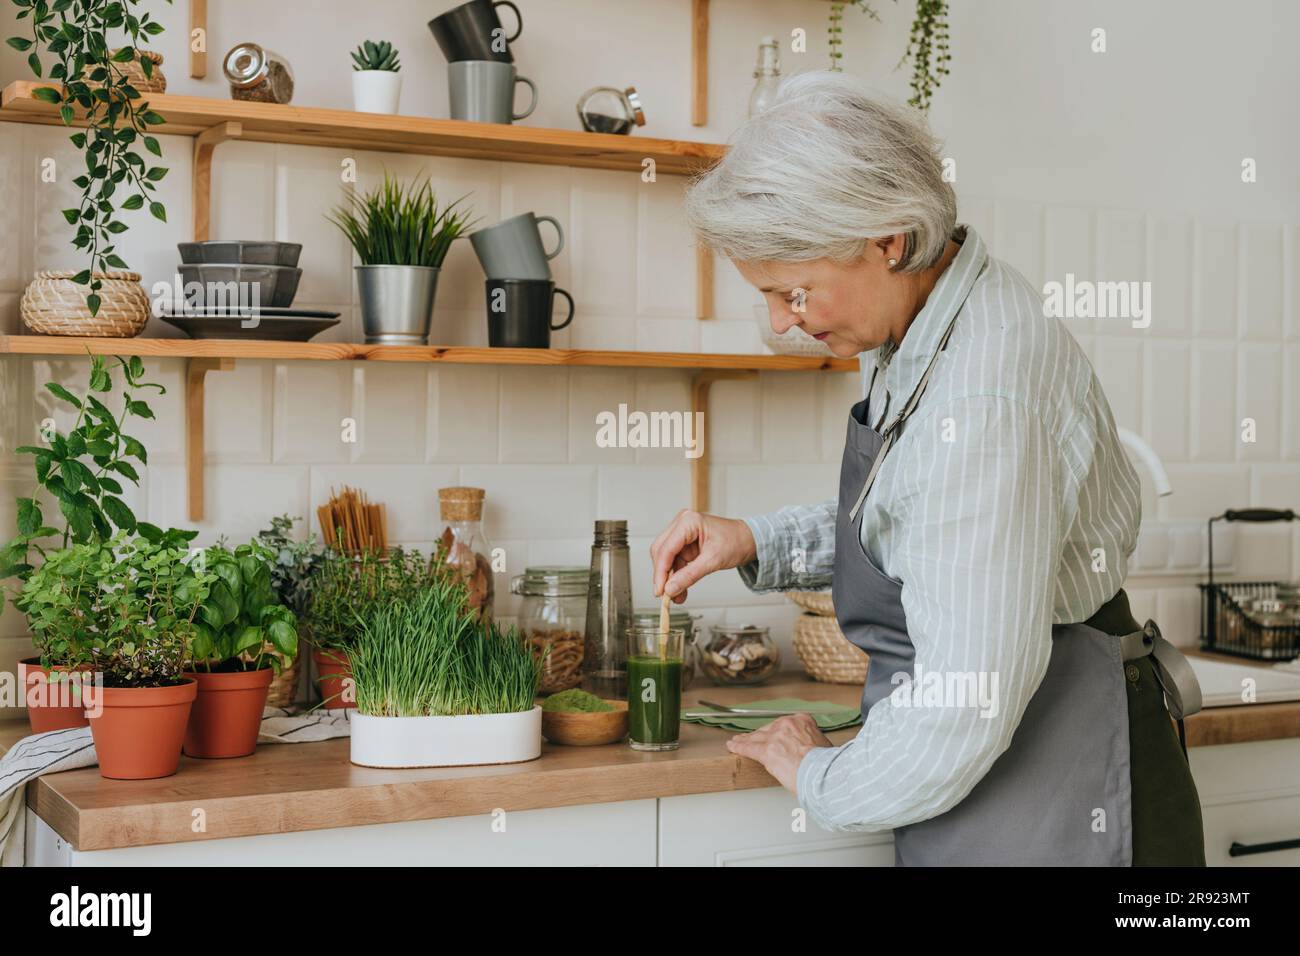 Woman preparing detox juice in kitchen at home Stock Photo